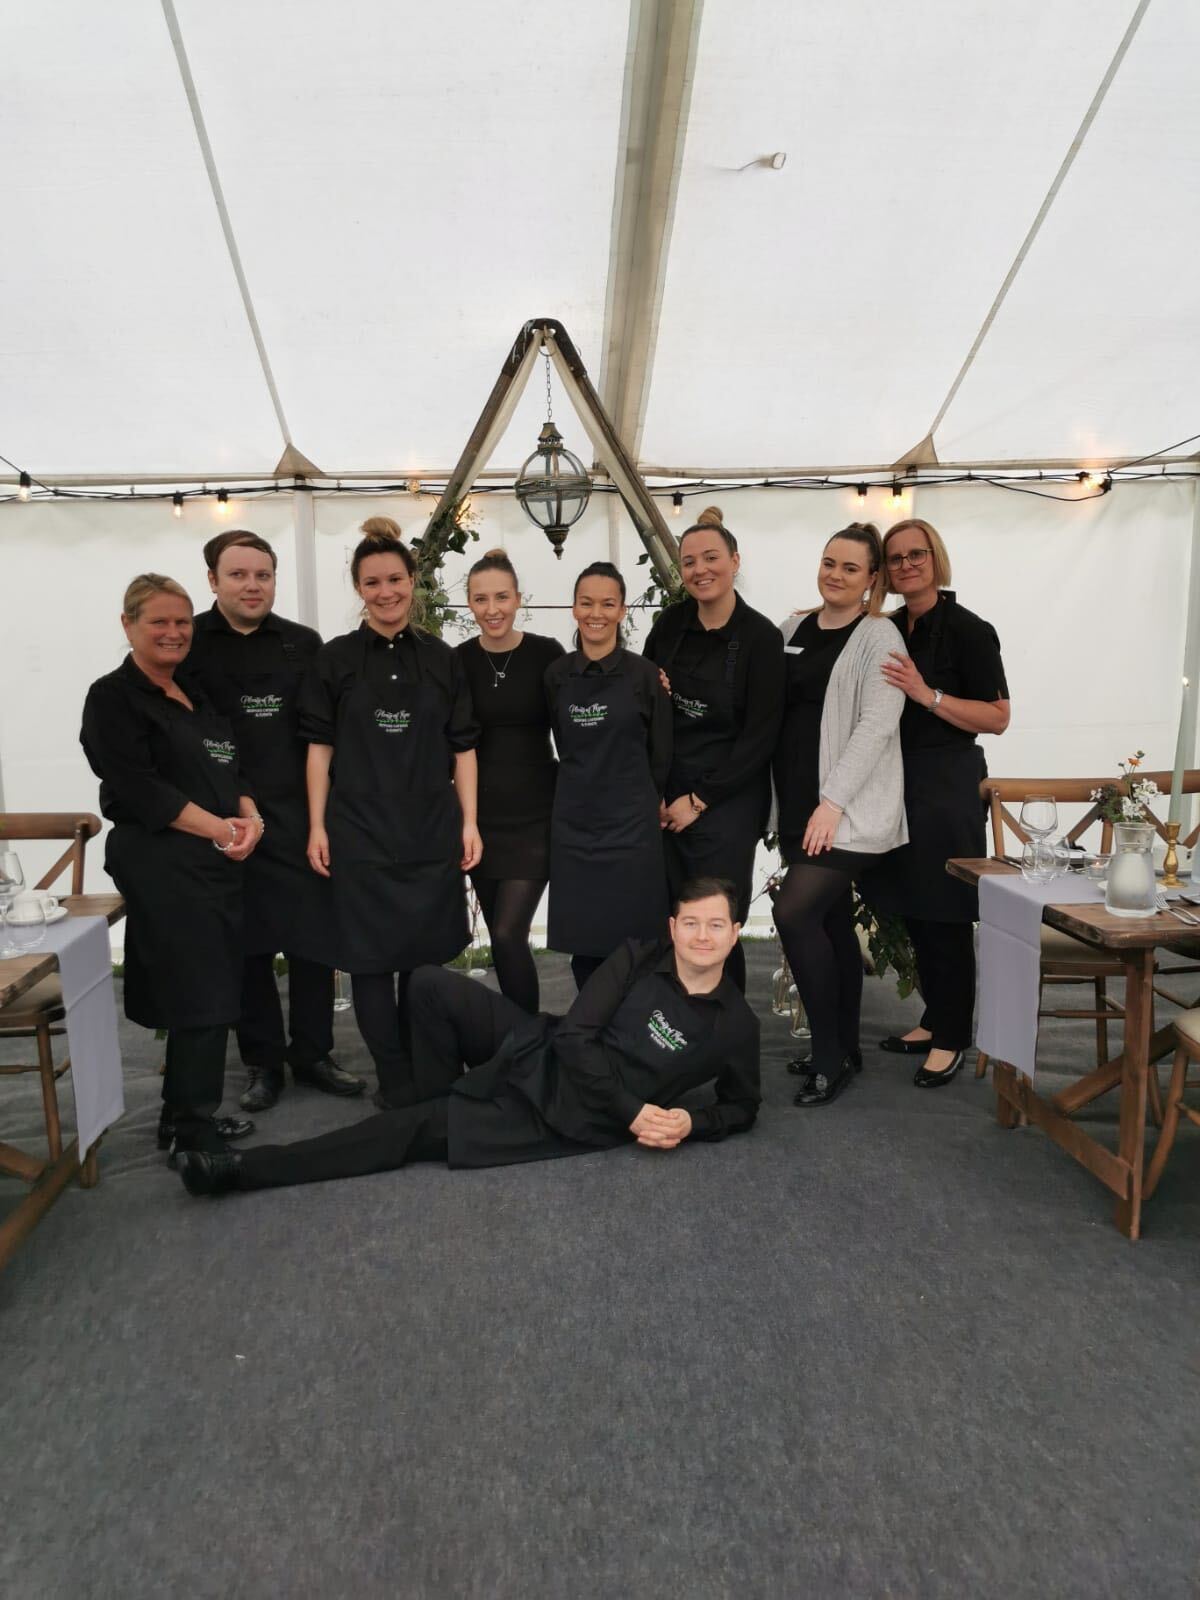 The Plenty Of Thyme team posing for an image inside a venue - come and join us as casual event staff!